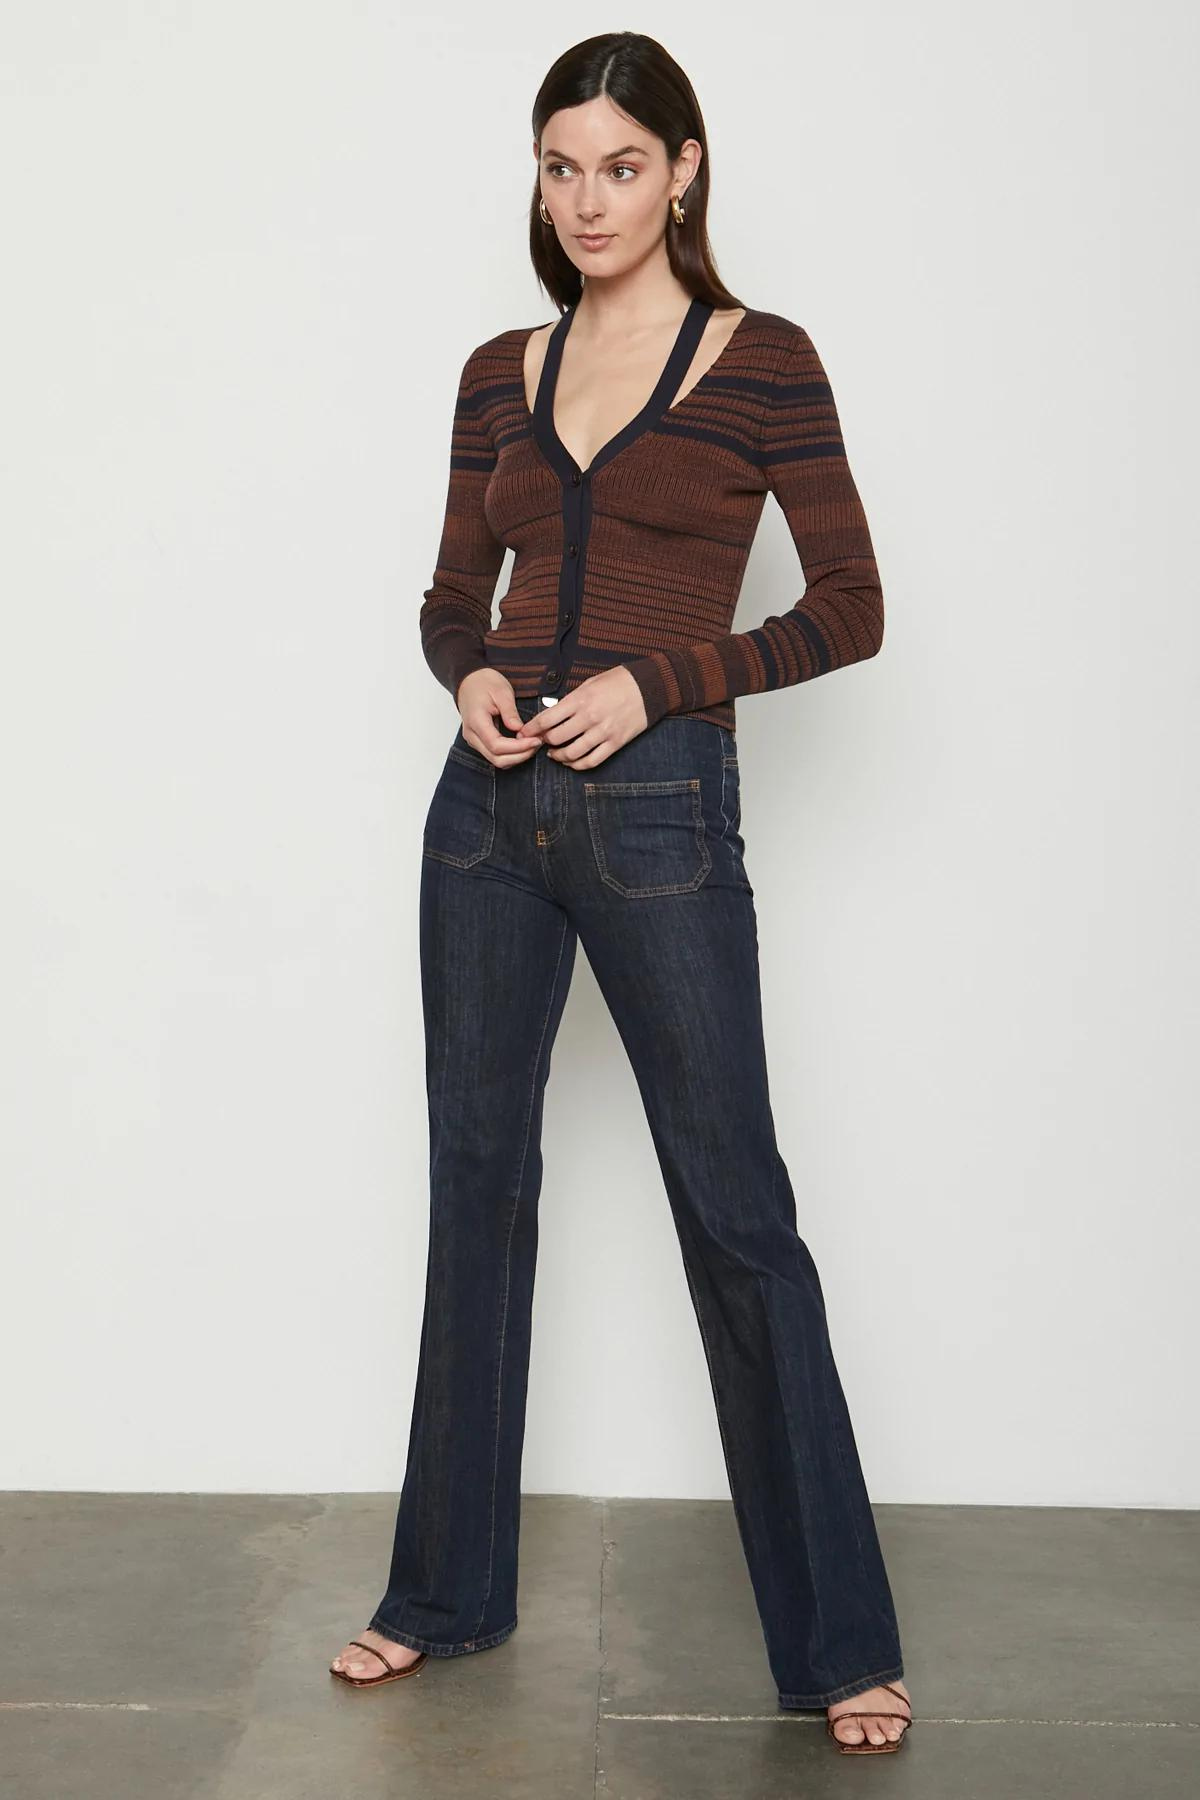 BAILEY 44 knit top and pant